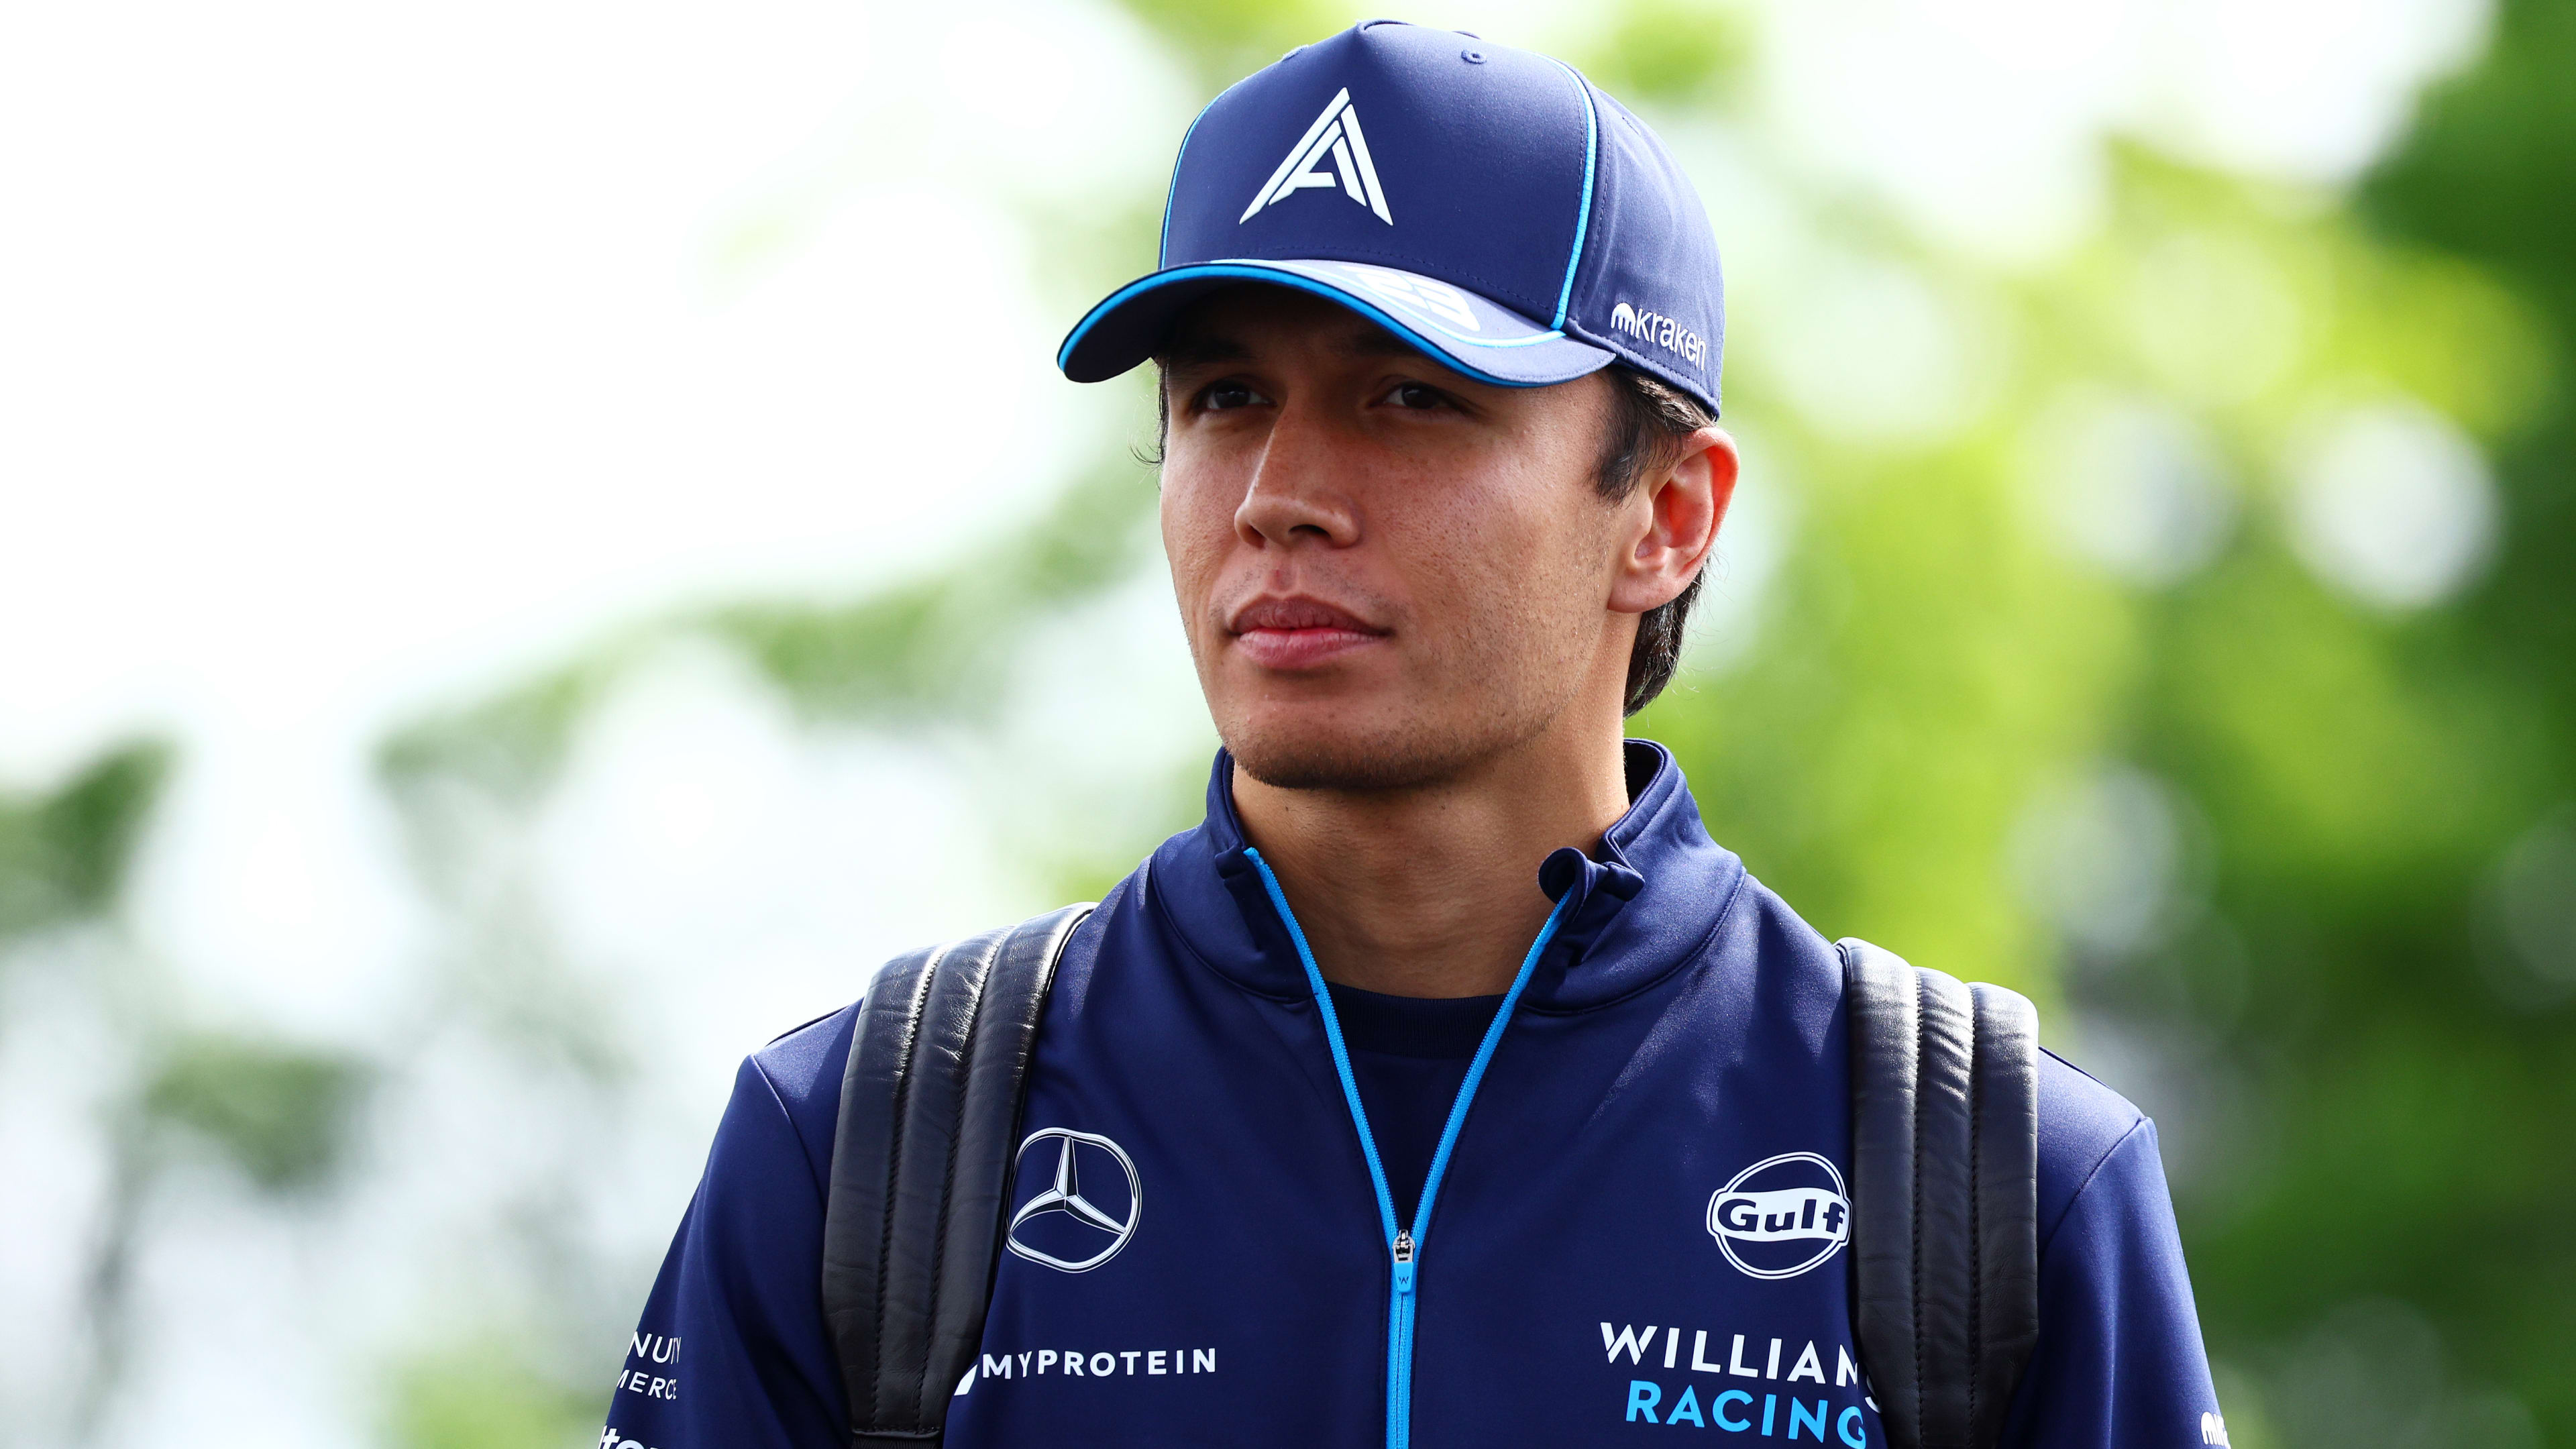 Williams praise Alex Albon’s qualities and believe he has the potential to be a world champion